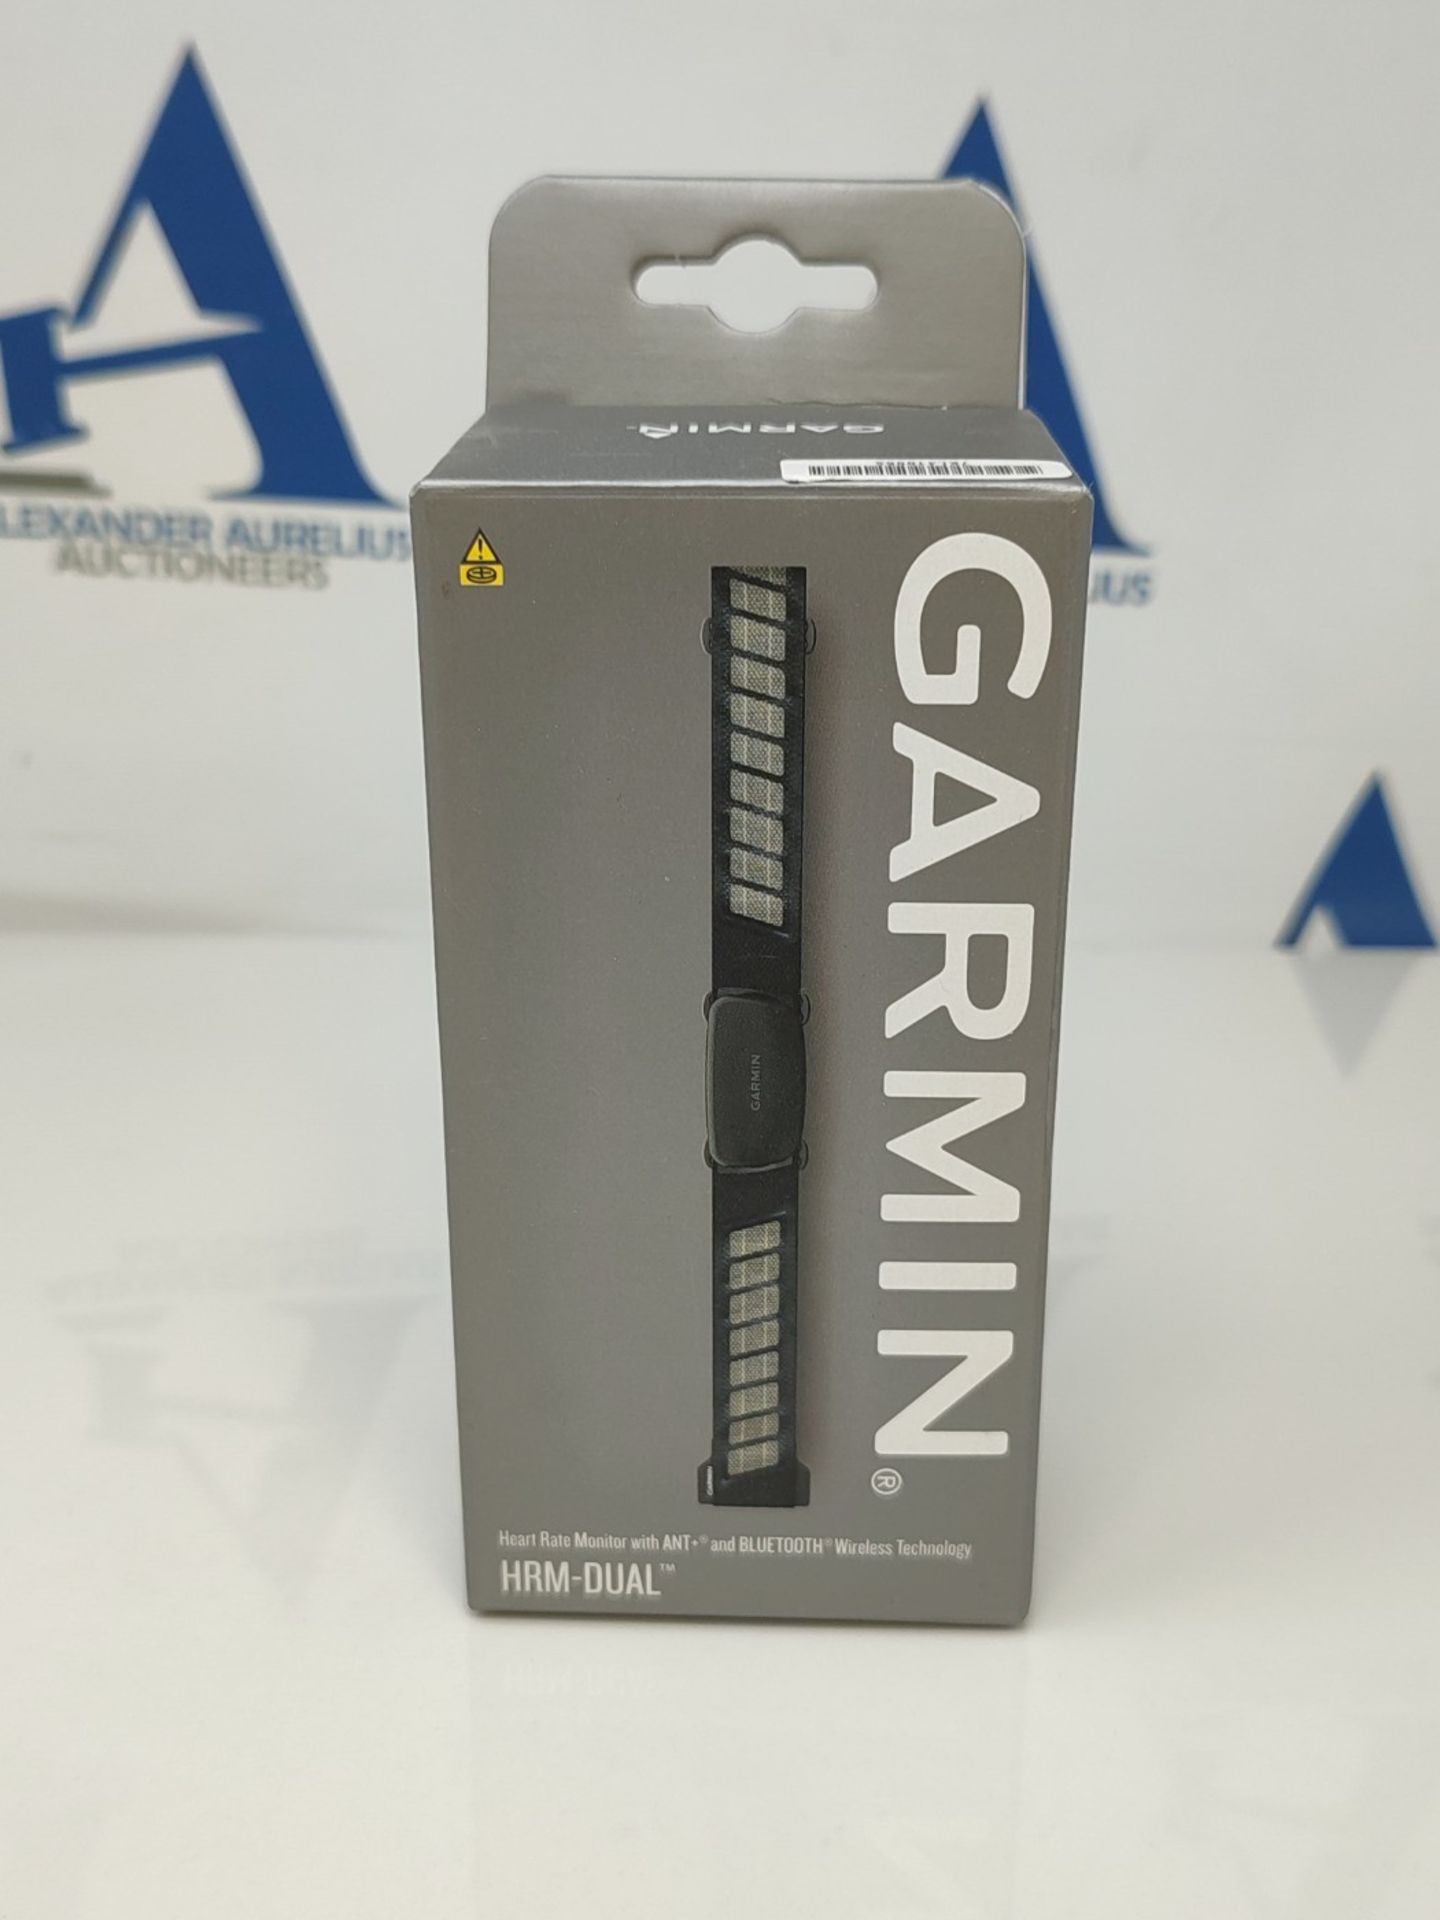 RRP £51.00 Garmin HRM-DUAL - chest strap for recording heart rate values, ANT+ & Bluetooth techno - Image 2 of 3